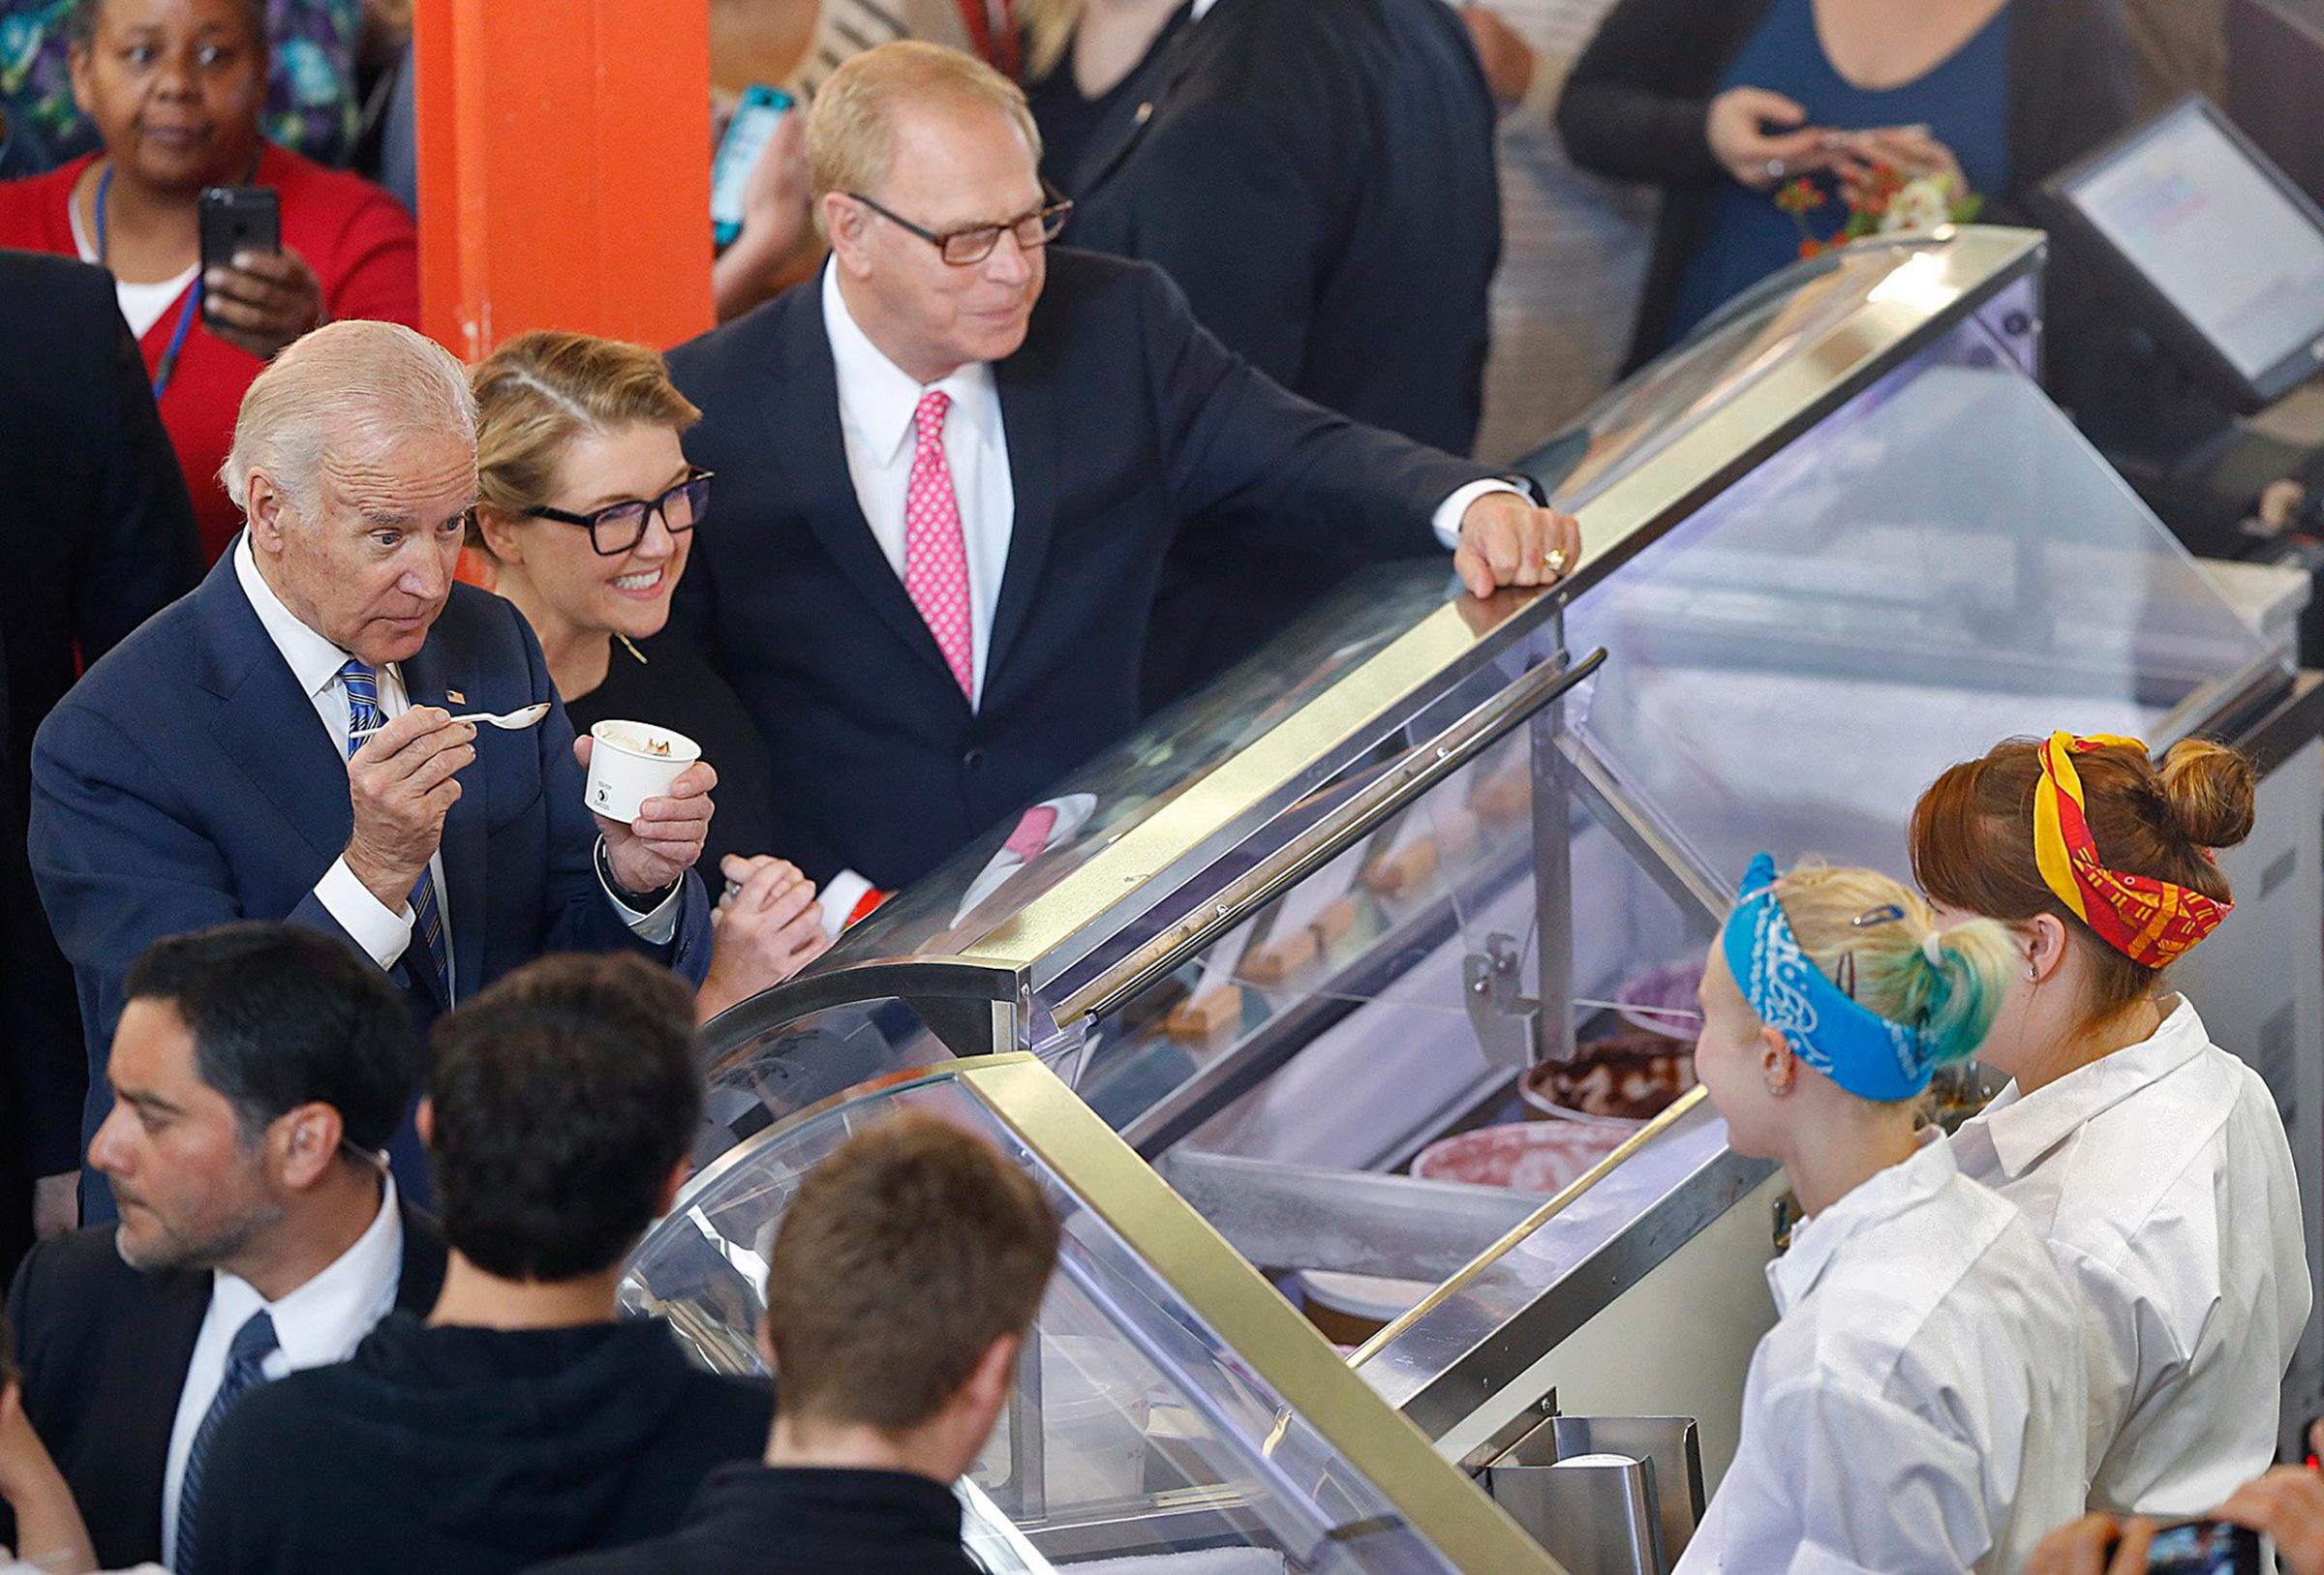 Vice President Joe Biden and Jeni's Spendid Ice Cream's founder Jeni Britton Bauer order some ice cream from her shop in the North Market in Columbus, Ohio on May 18, 2016.